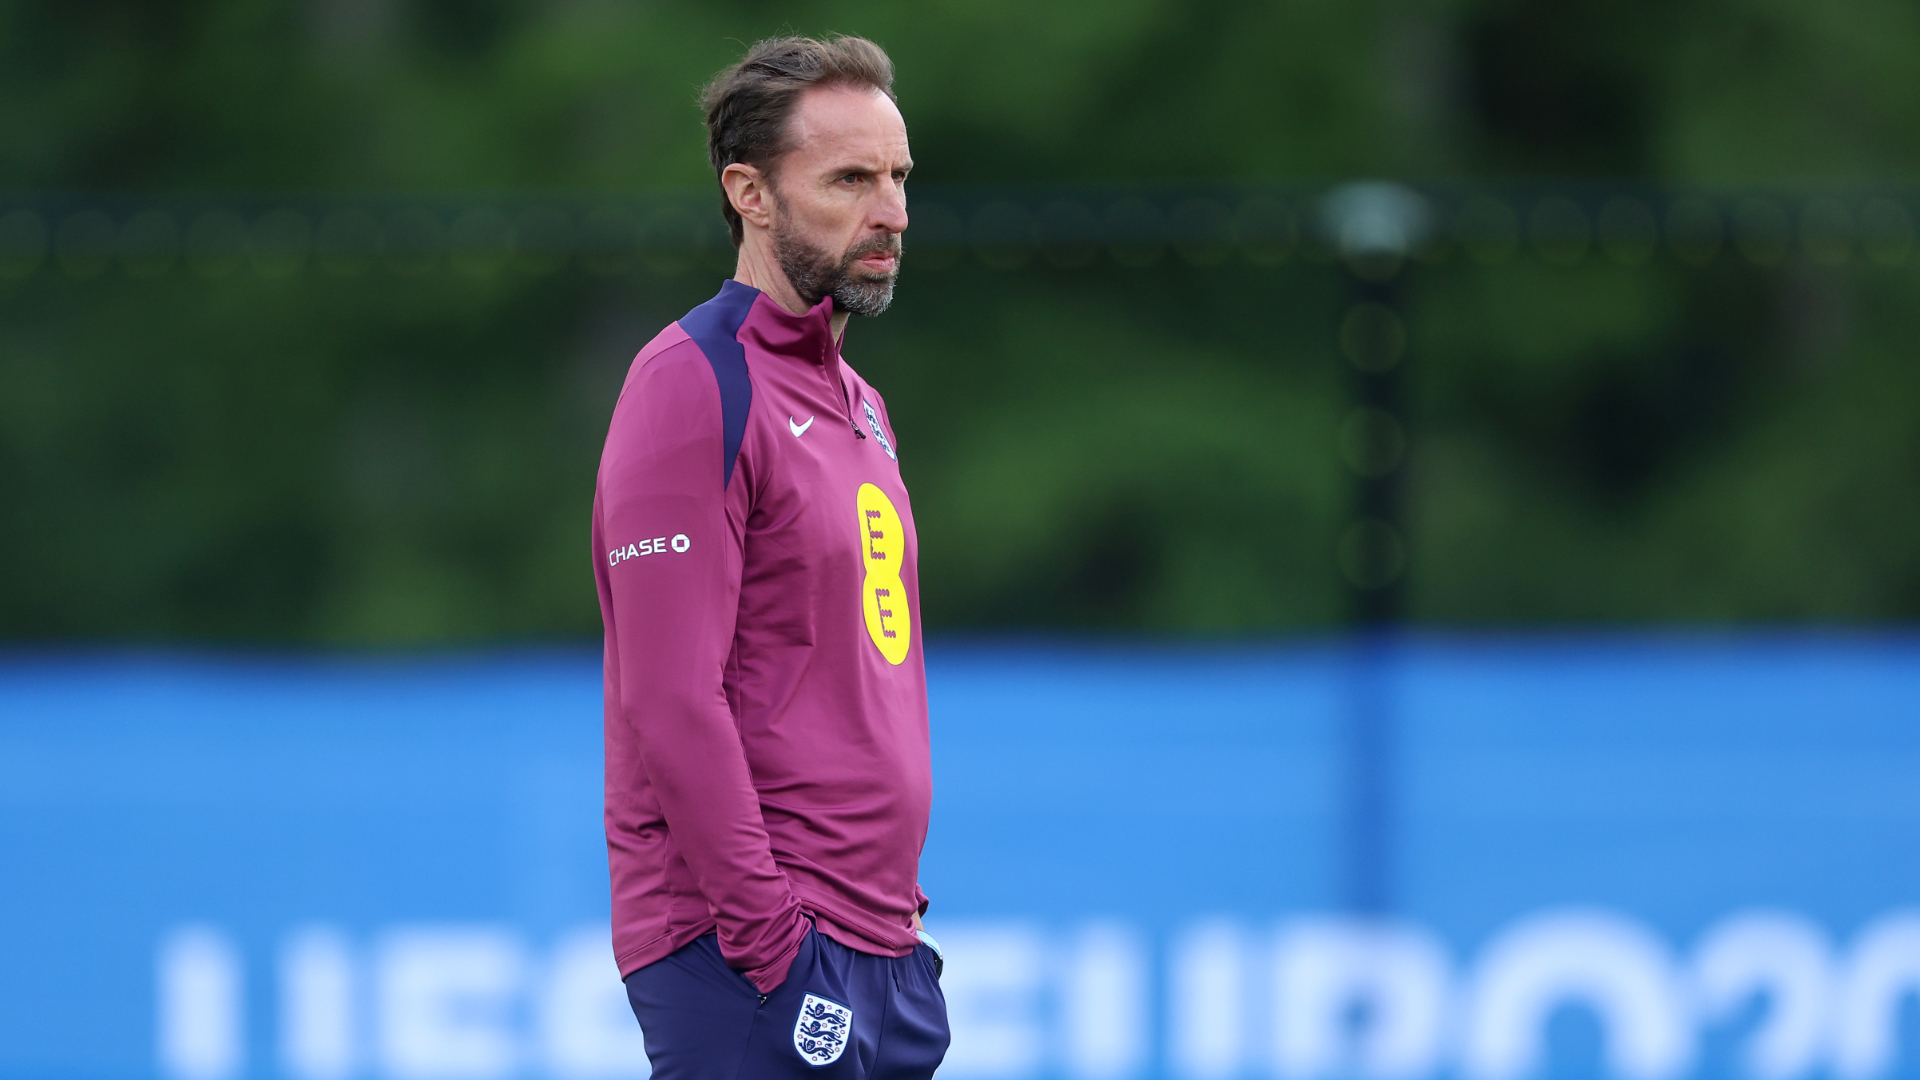 Everyone fit for England opener